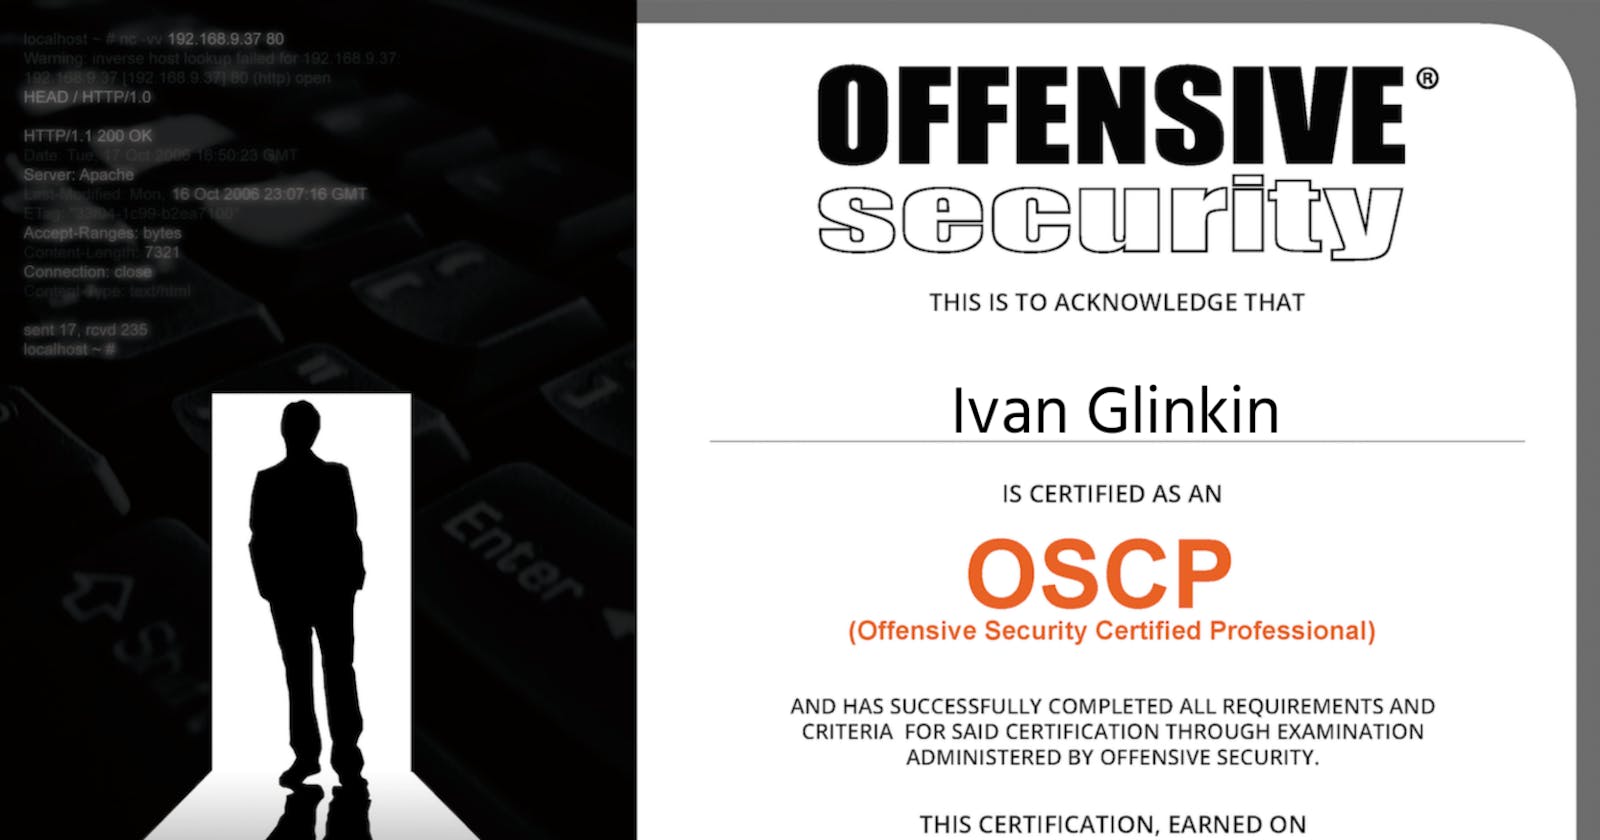 What is OSCP